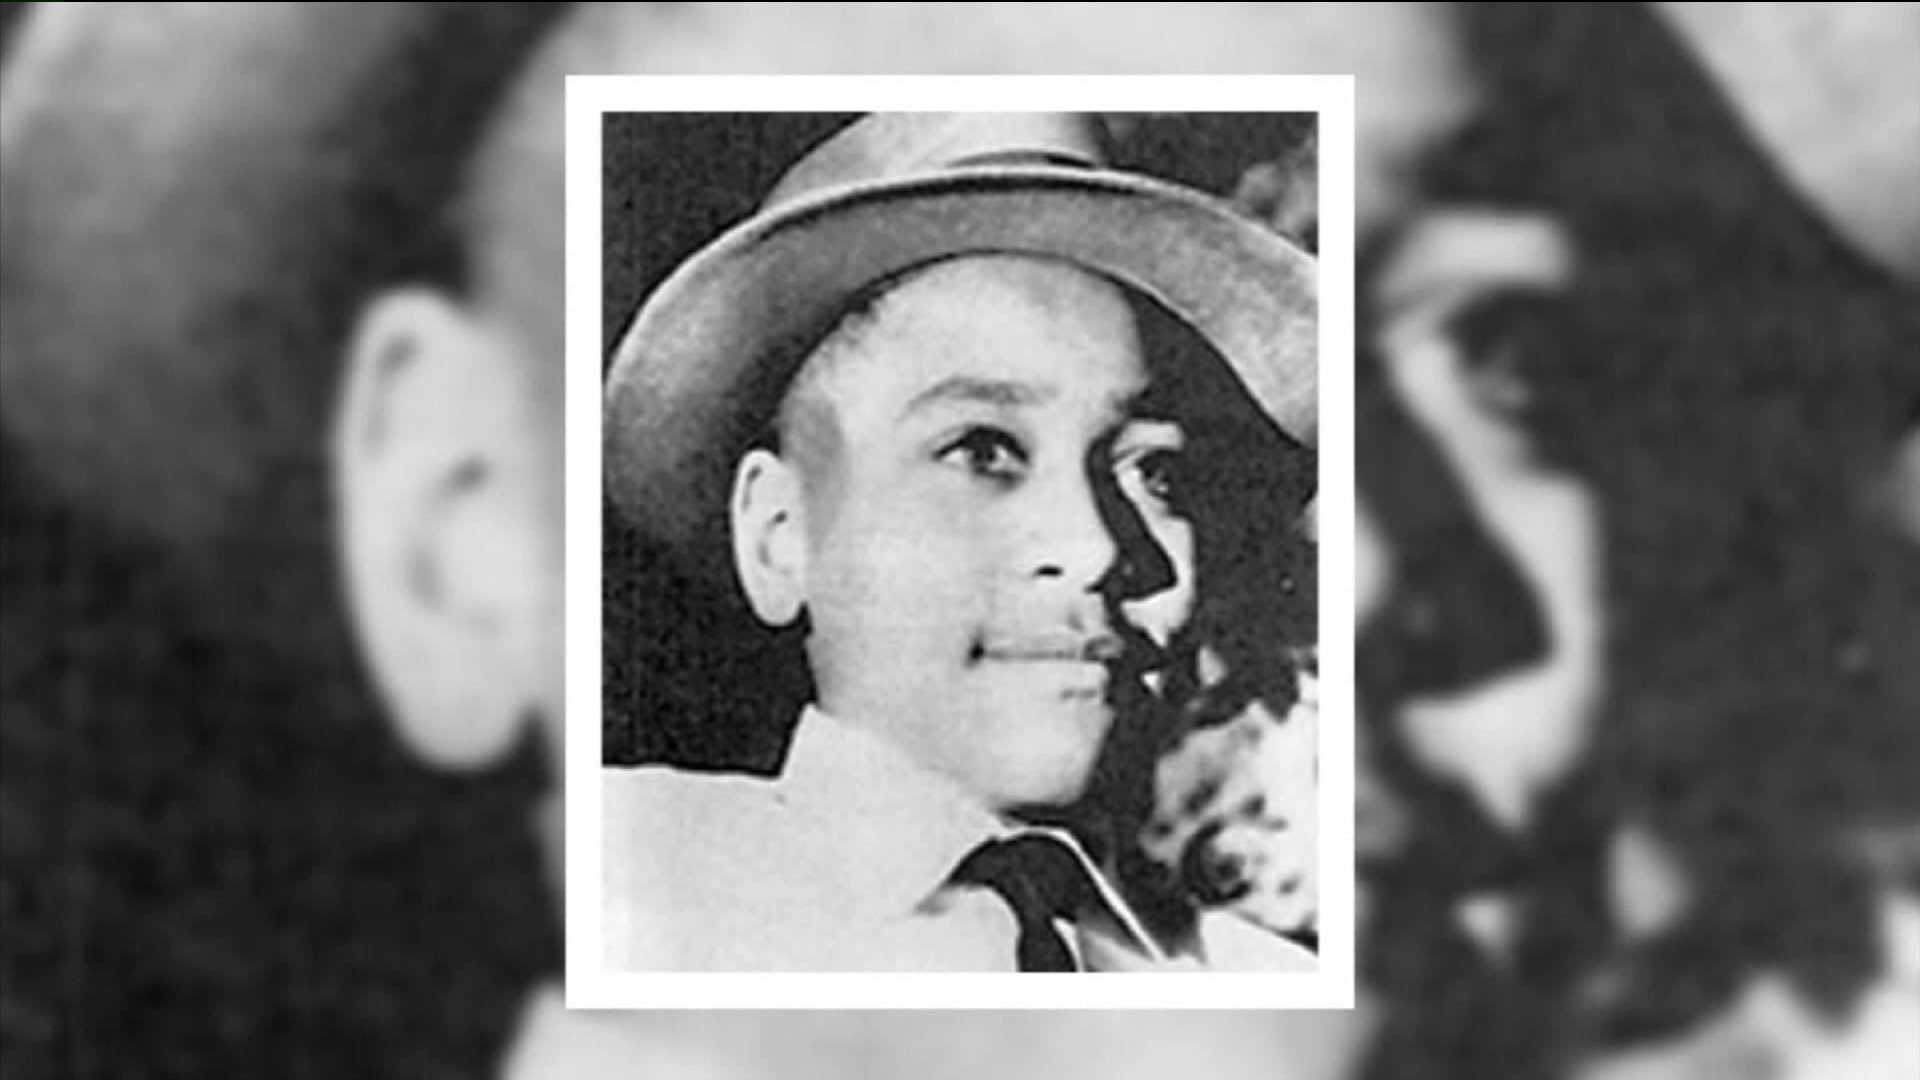 Government reopens probe of Emmett Till slaying